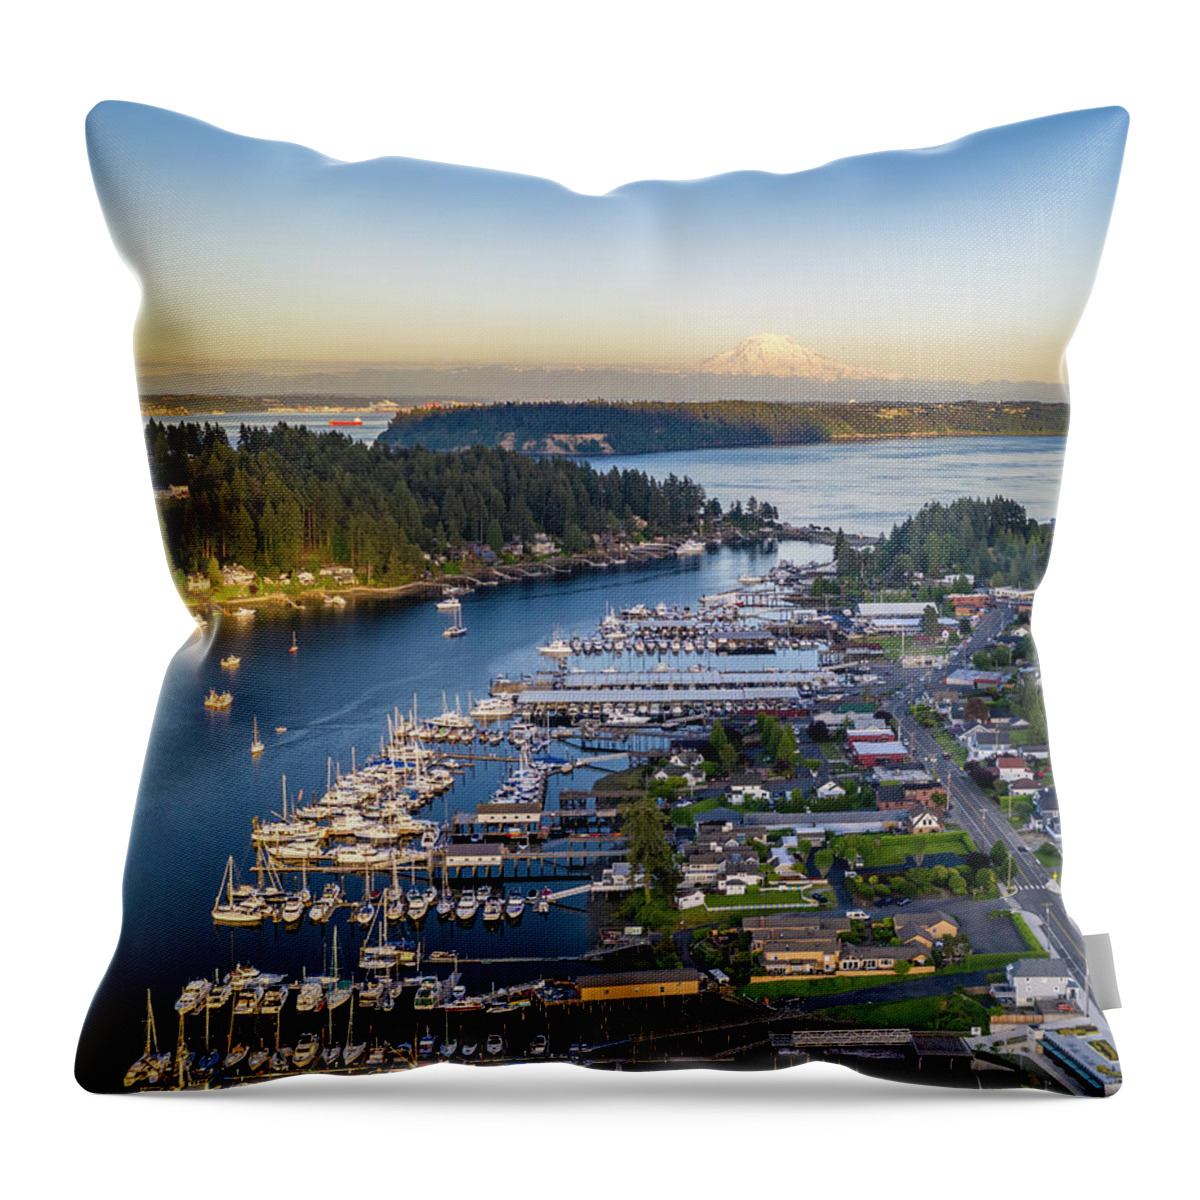 Drone Throw Pillow featuring the photograph Harbor Boats 4x5 by Clinton Ward